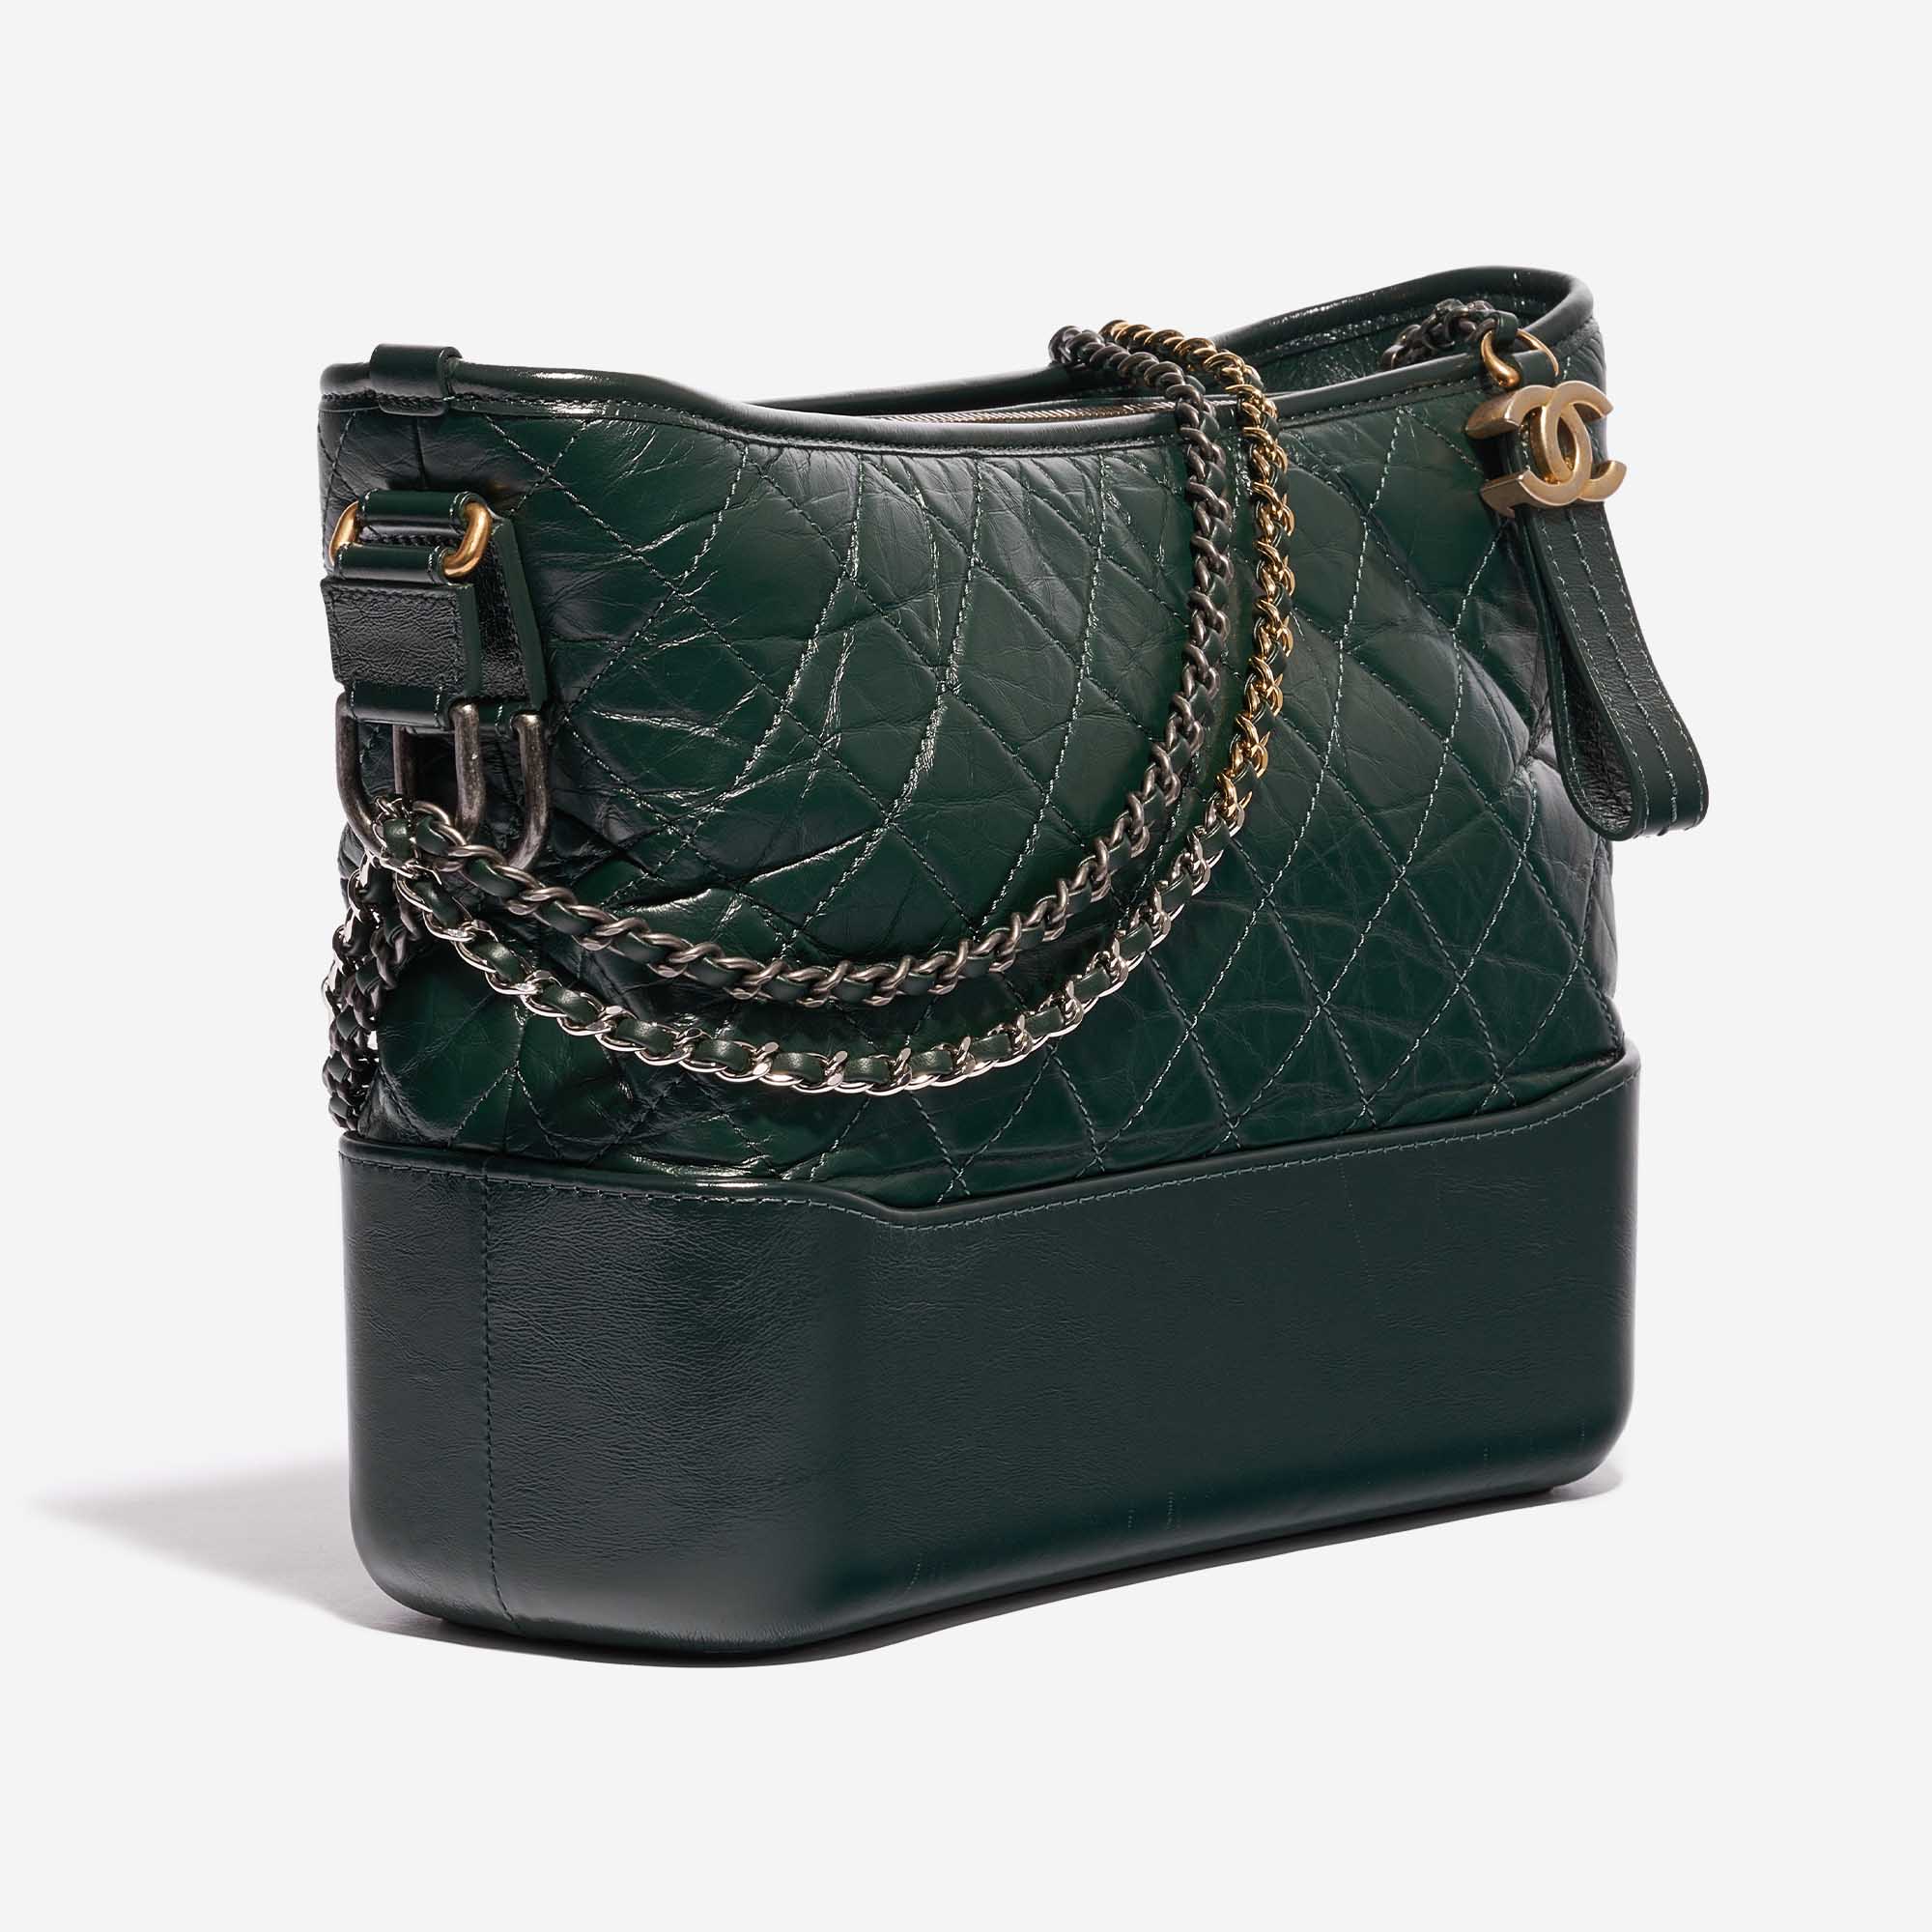 Chanel - Gabrielle Small - Green - New